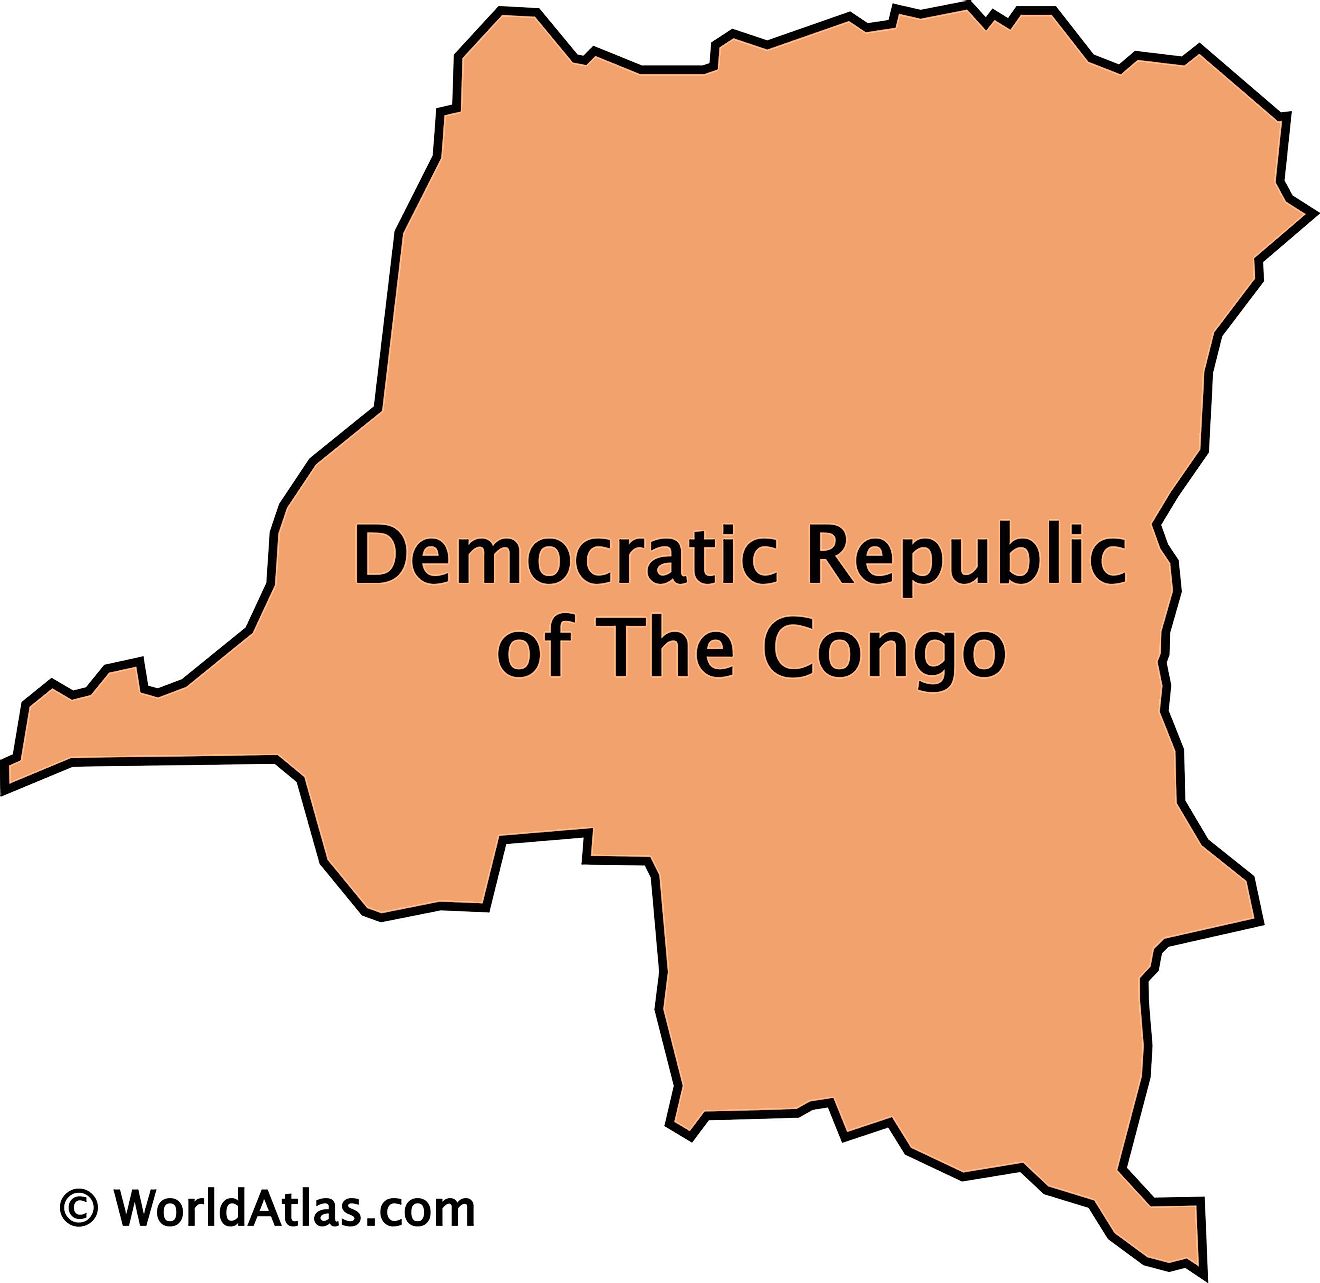 Outline map of the Democratic Republic of Congo